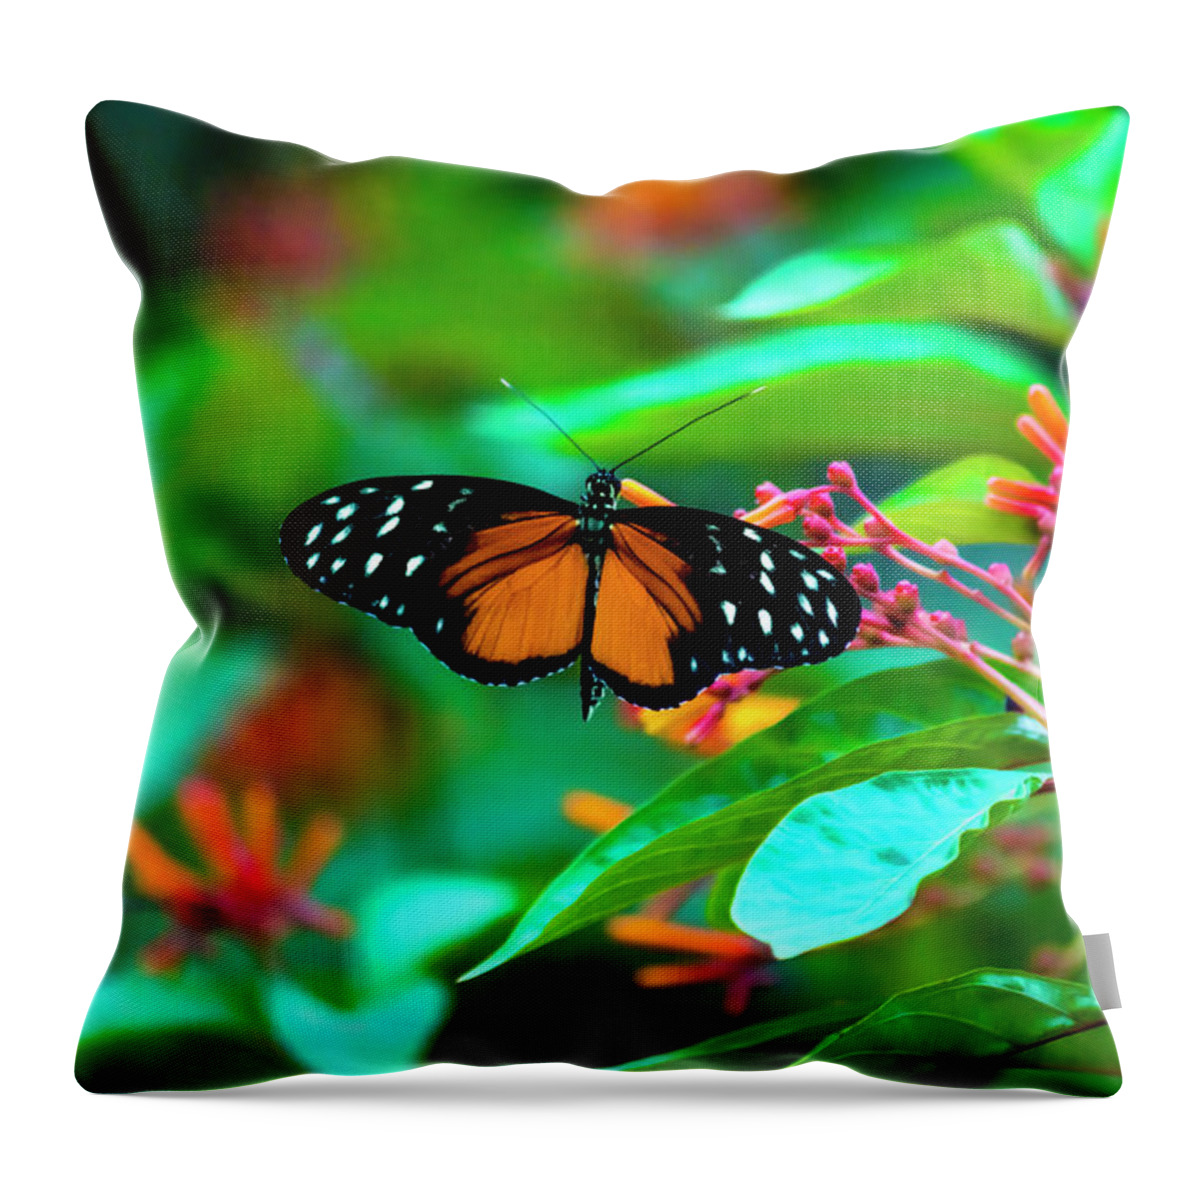 Tiger Longwing Butterfly Throw Pillow featuring the photograph Tiger Longwing Butterfly by David Morefield